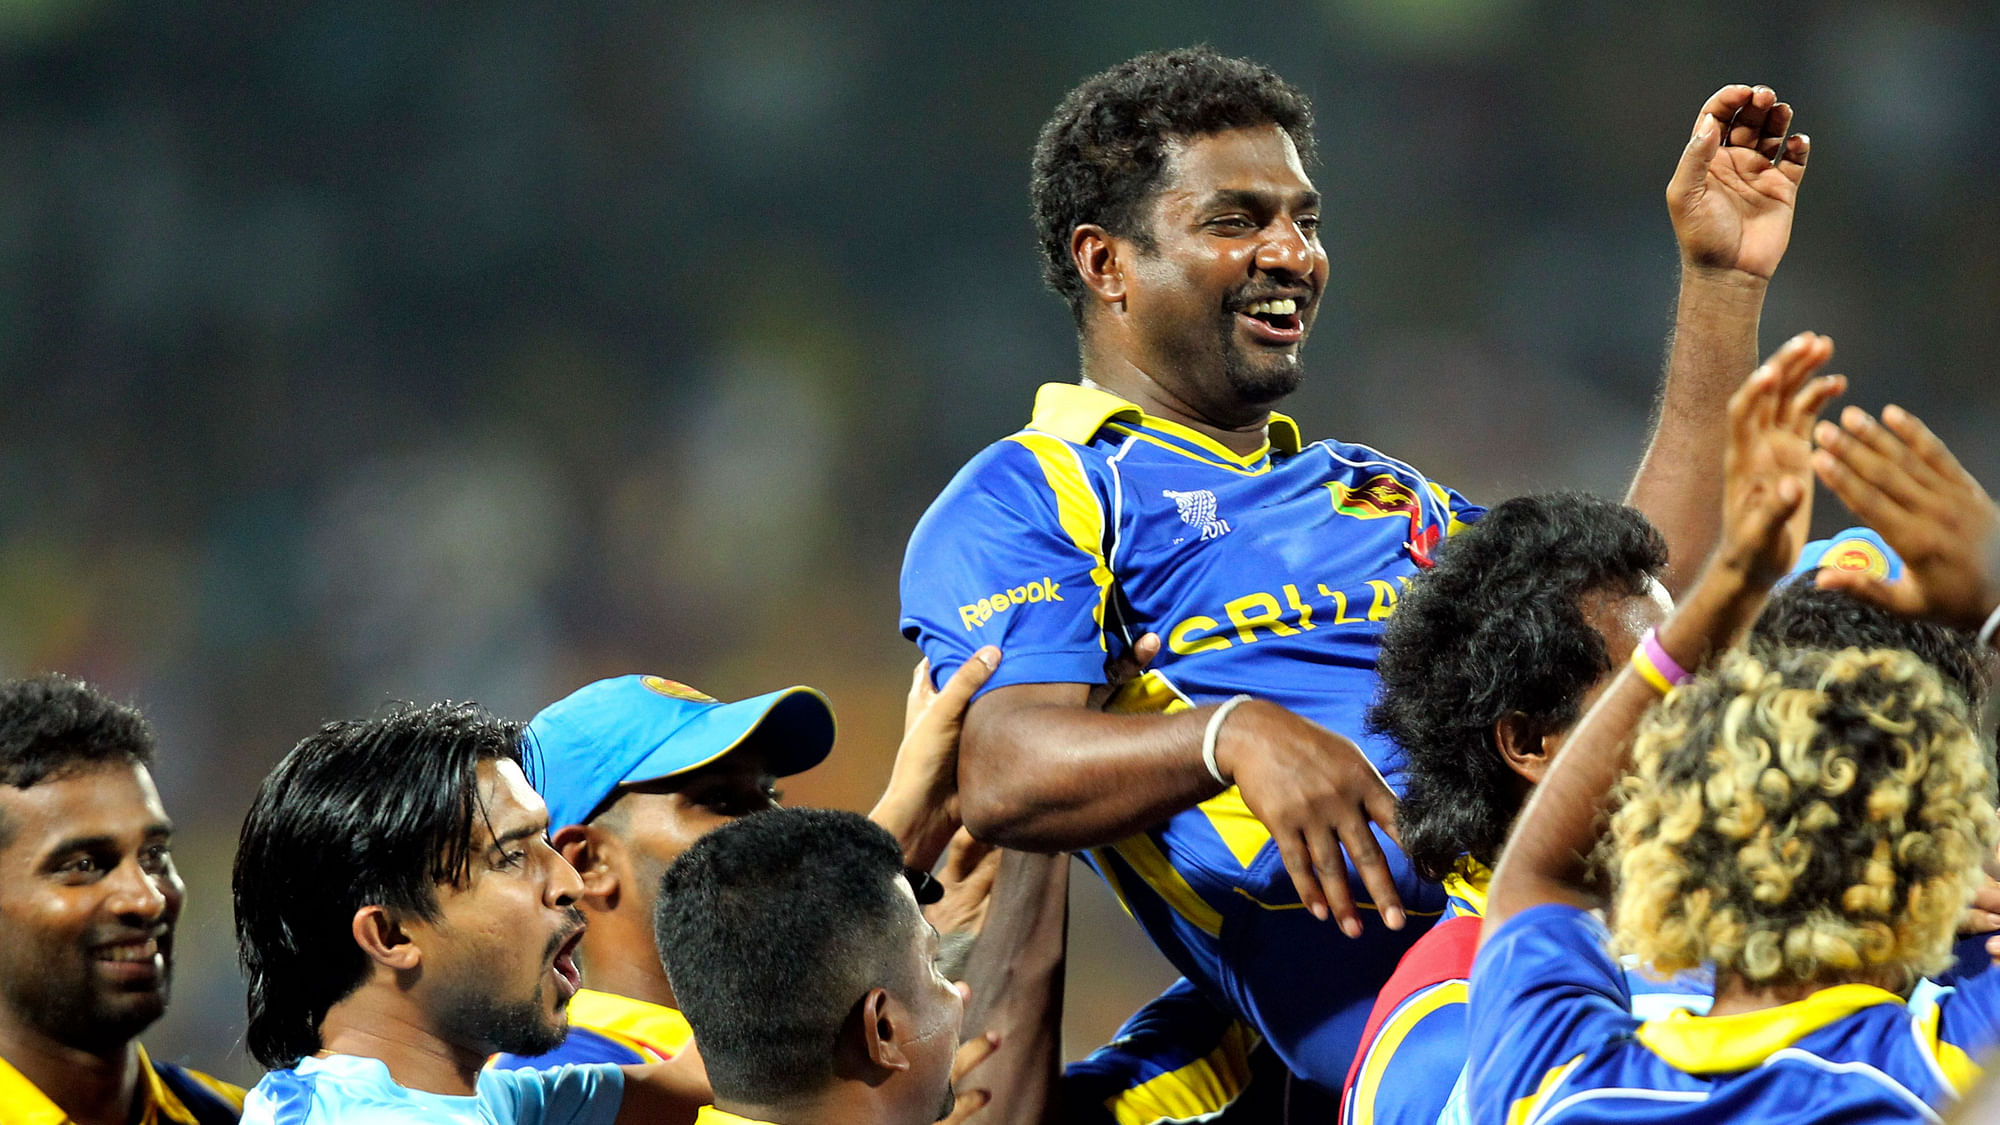 Muttiah Muralitharan to be the first Sri Lankan to be inducted in the ICC Hall of Fame. (Photo: Reuters)